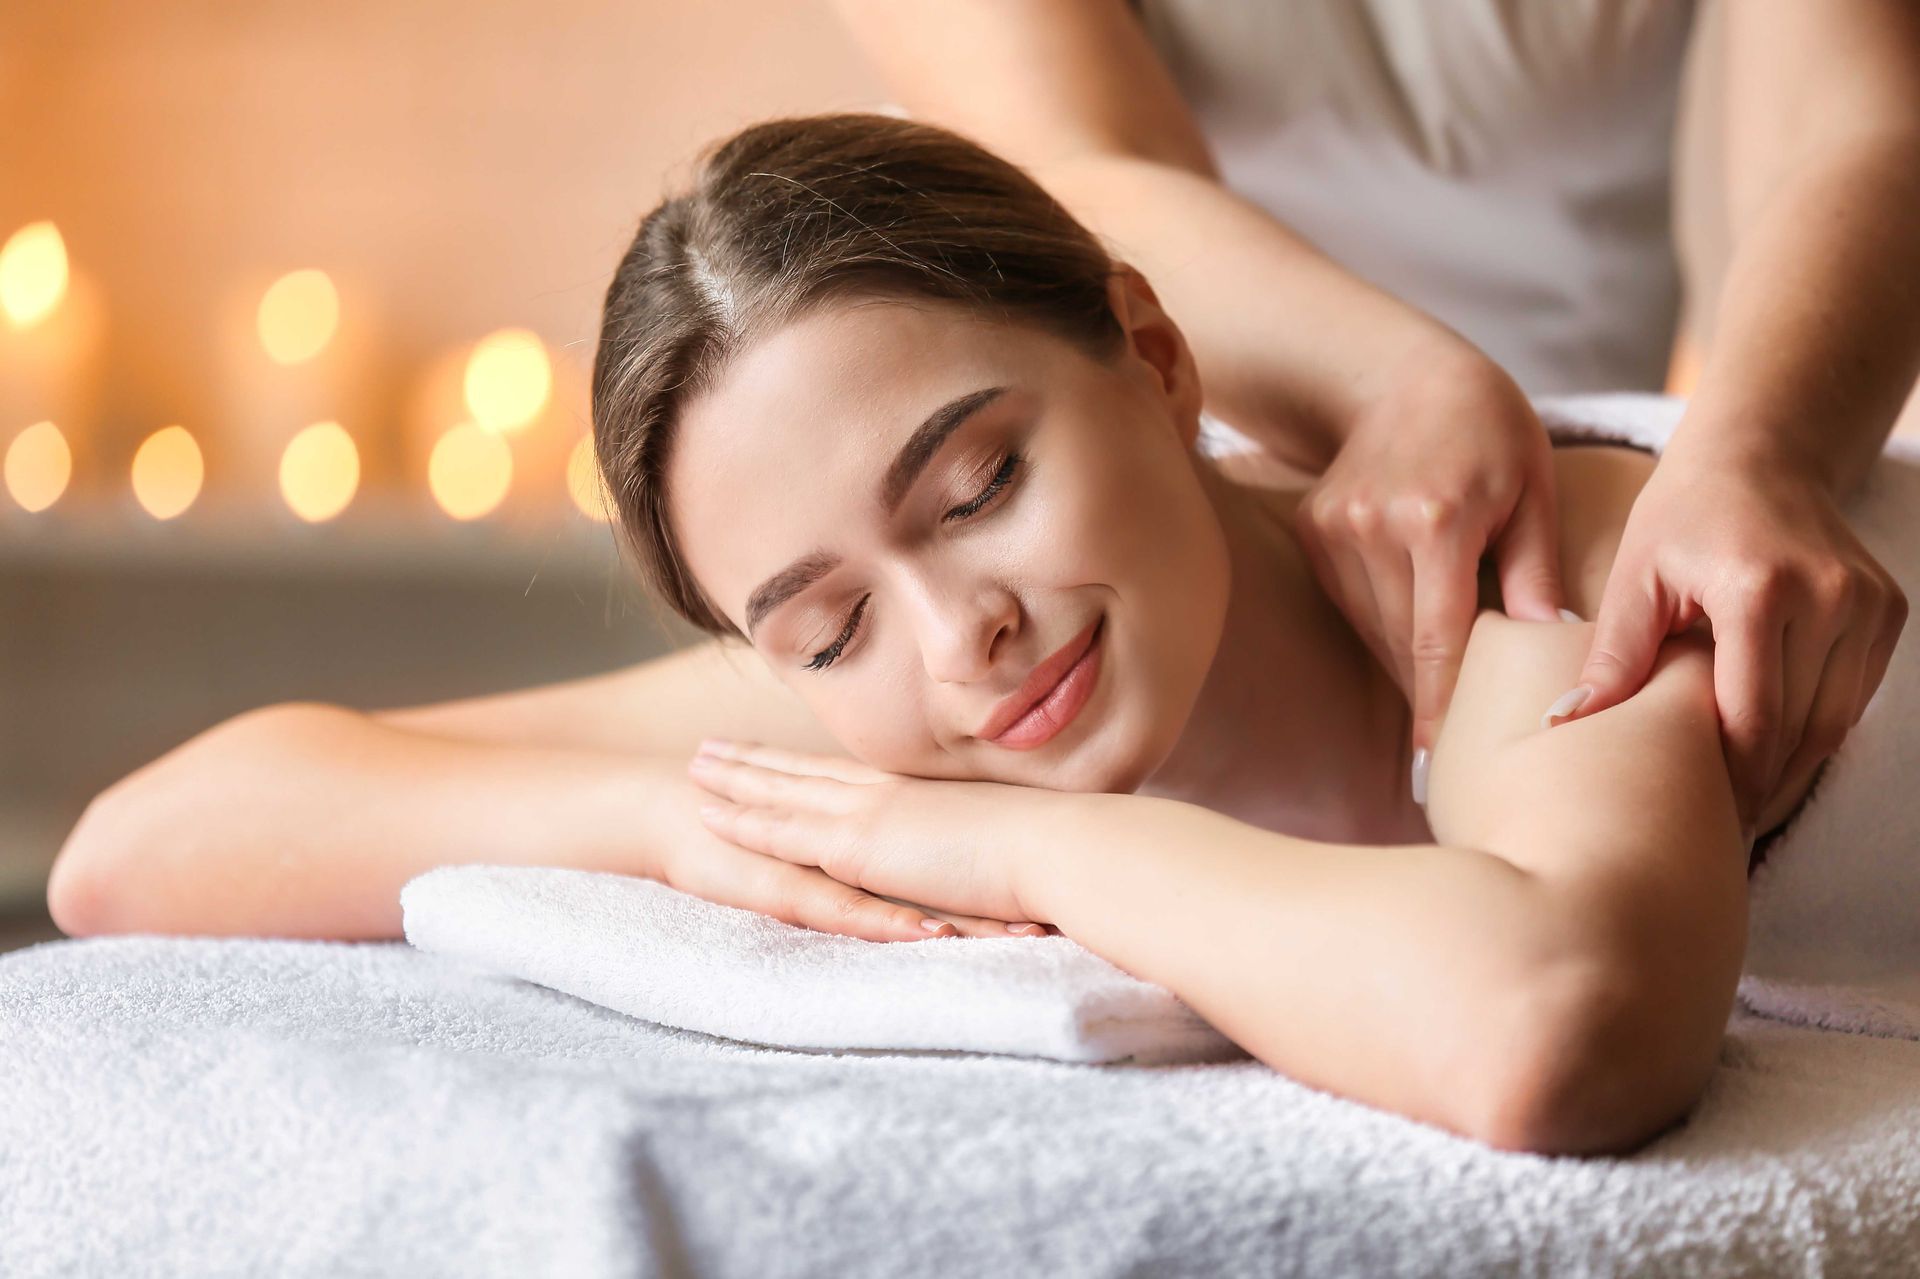 A woman is getting a massage at a spa